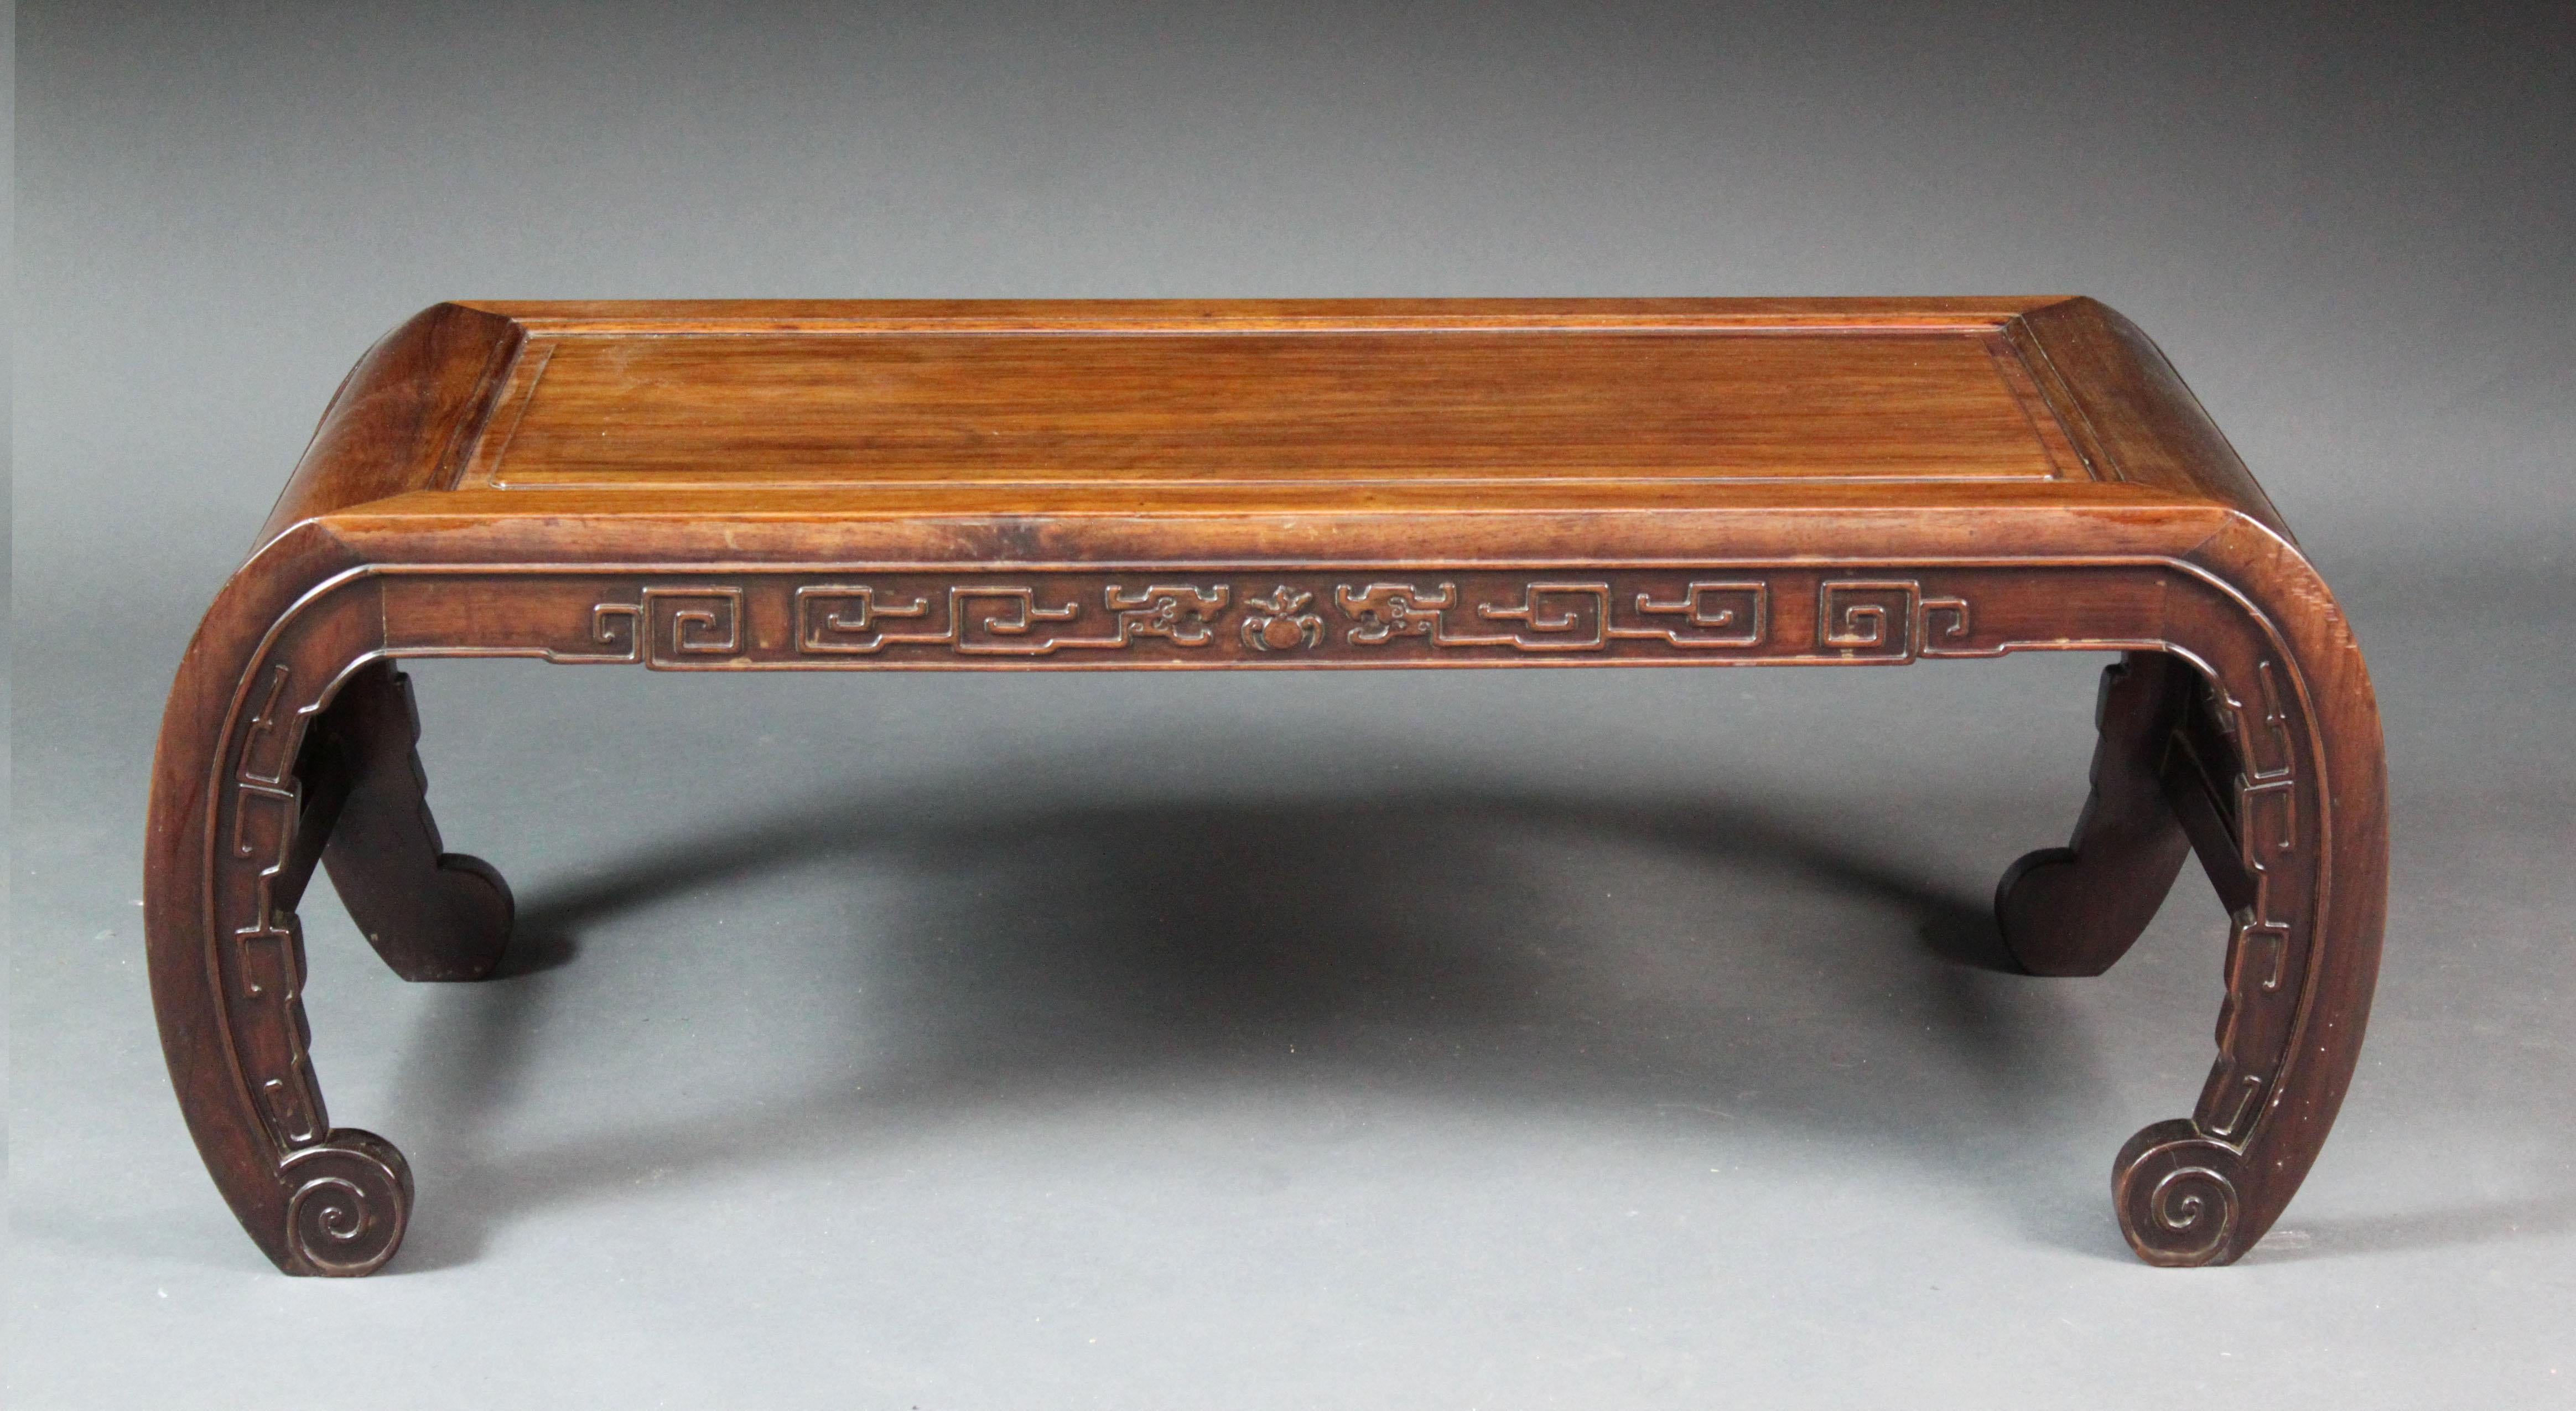 A late 19th/early 20th century Chinese hardwood low opium table with recessed panel top and carved bow ends; carved frieze on scrolled feet.

Top surface area 34.5